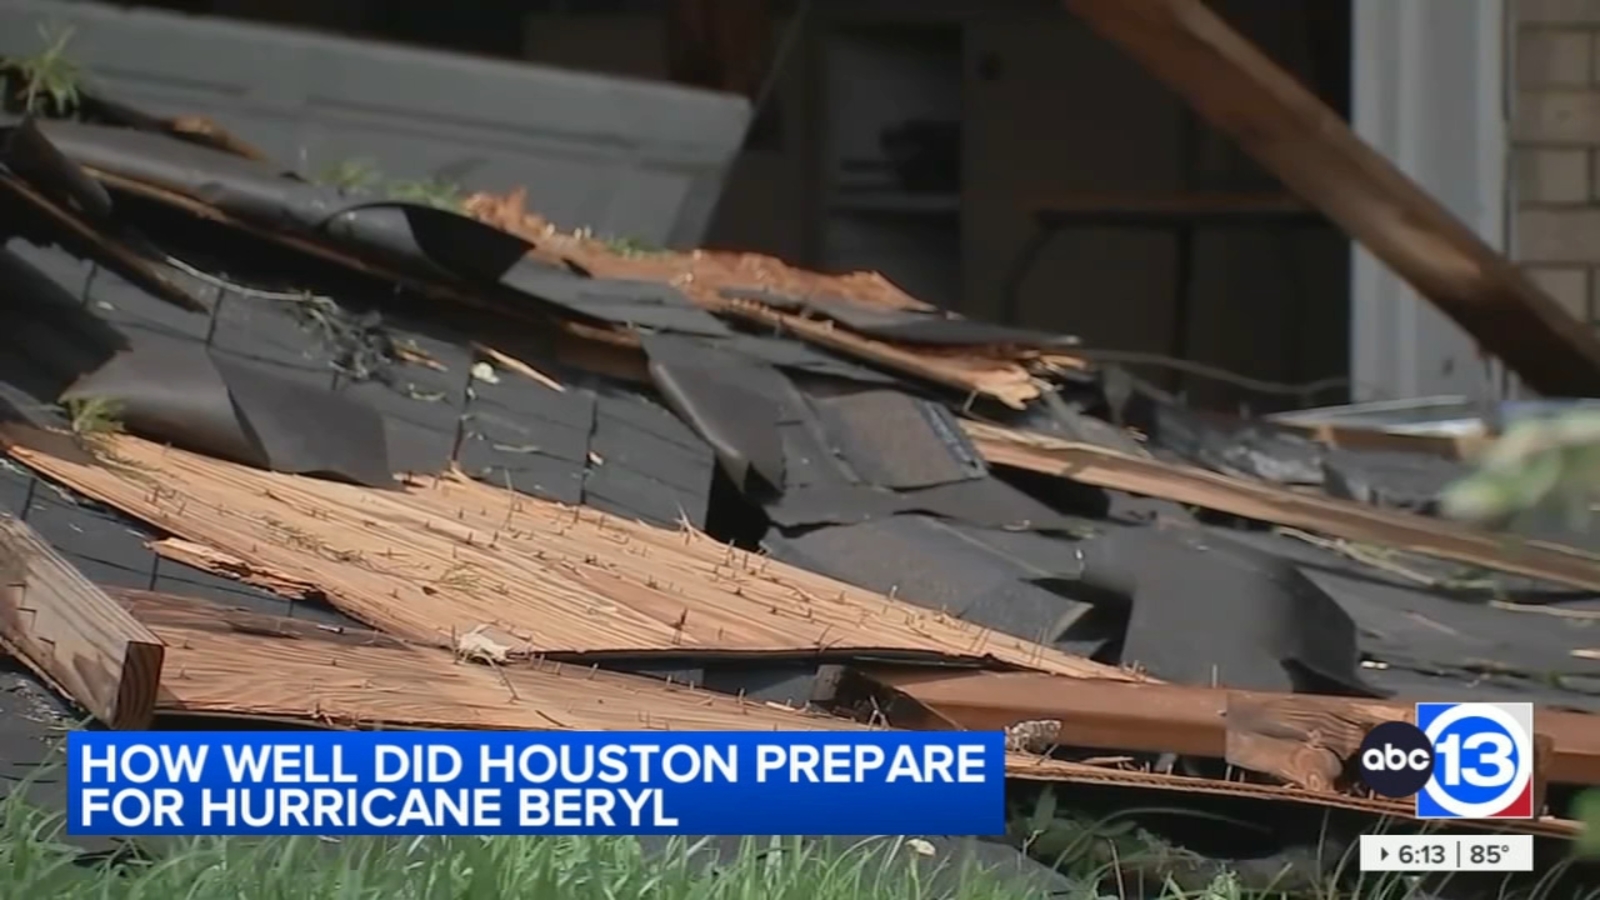 Houston City Council puts Hurricane Beryl preparations under microscope, future fixes for next disaster after deaths, outages [Video]